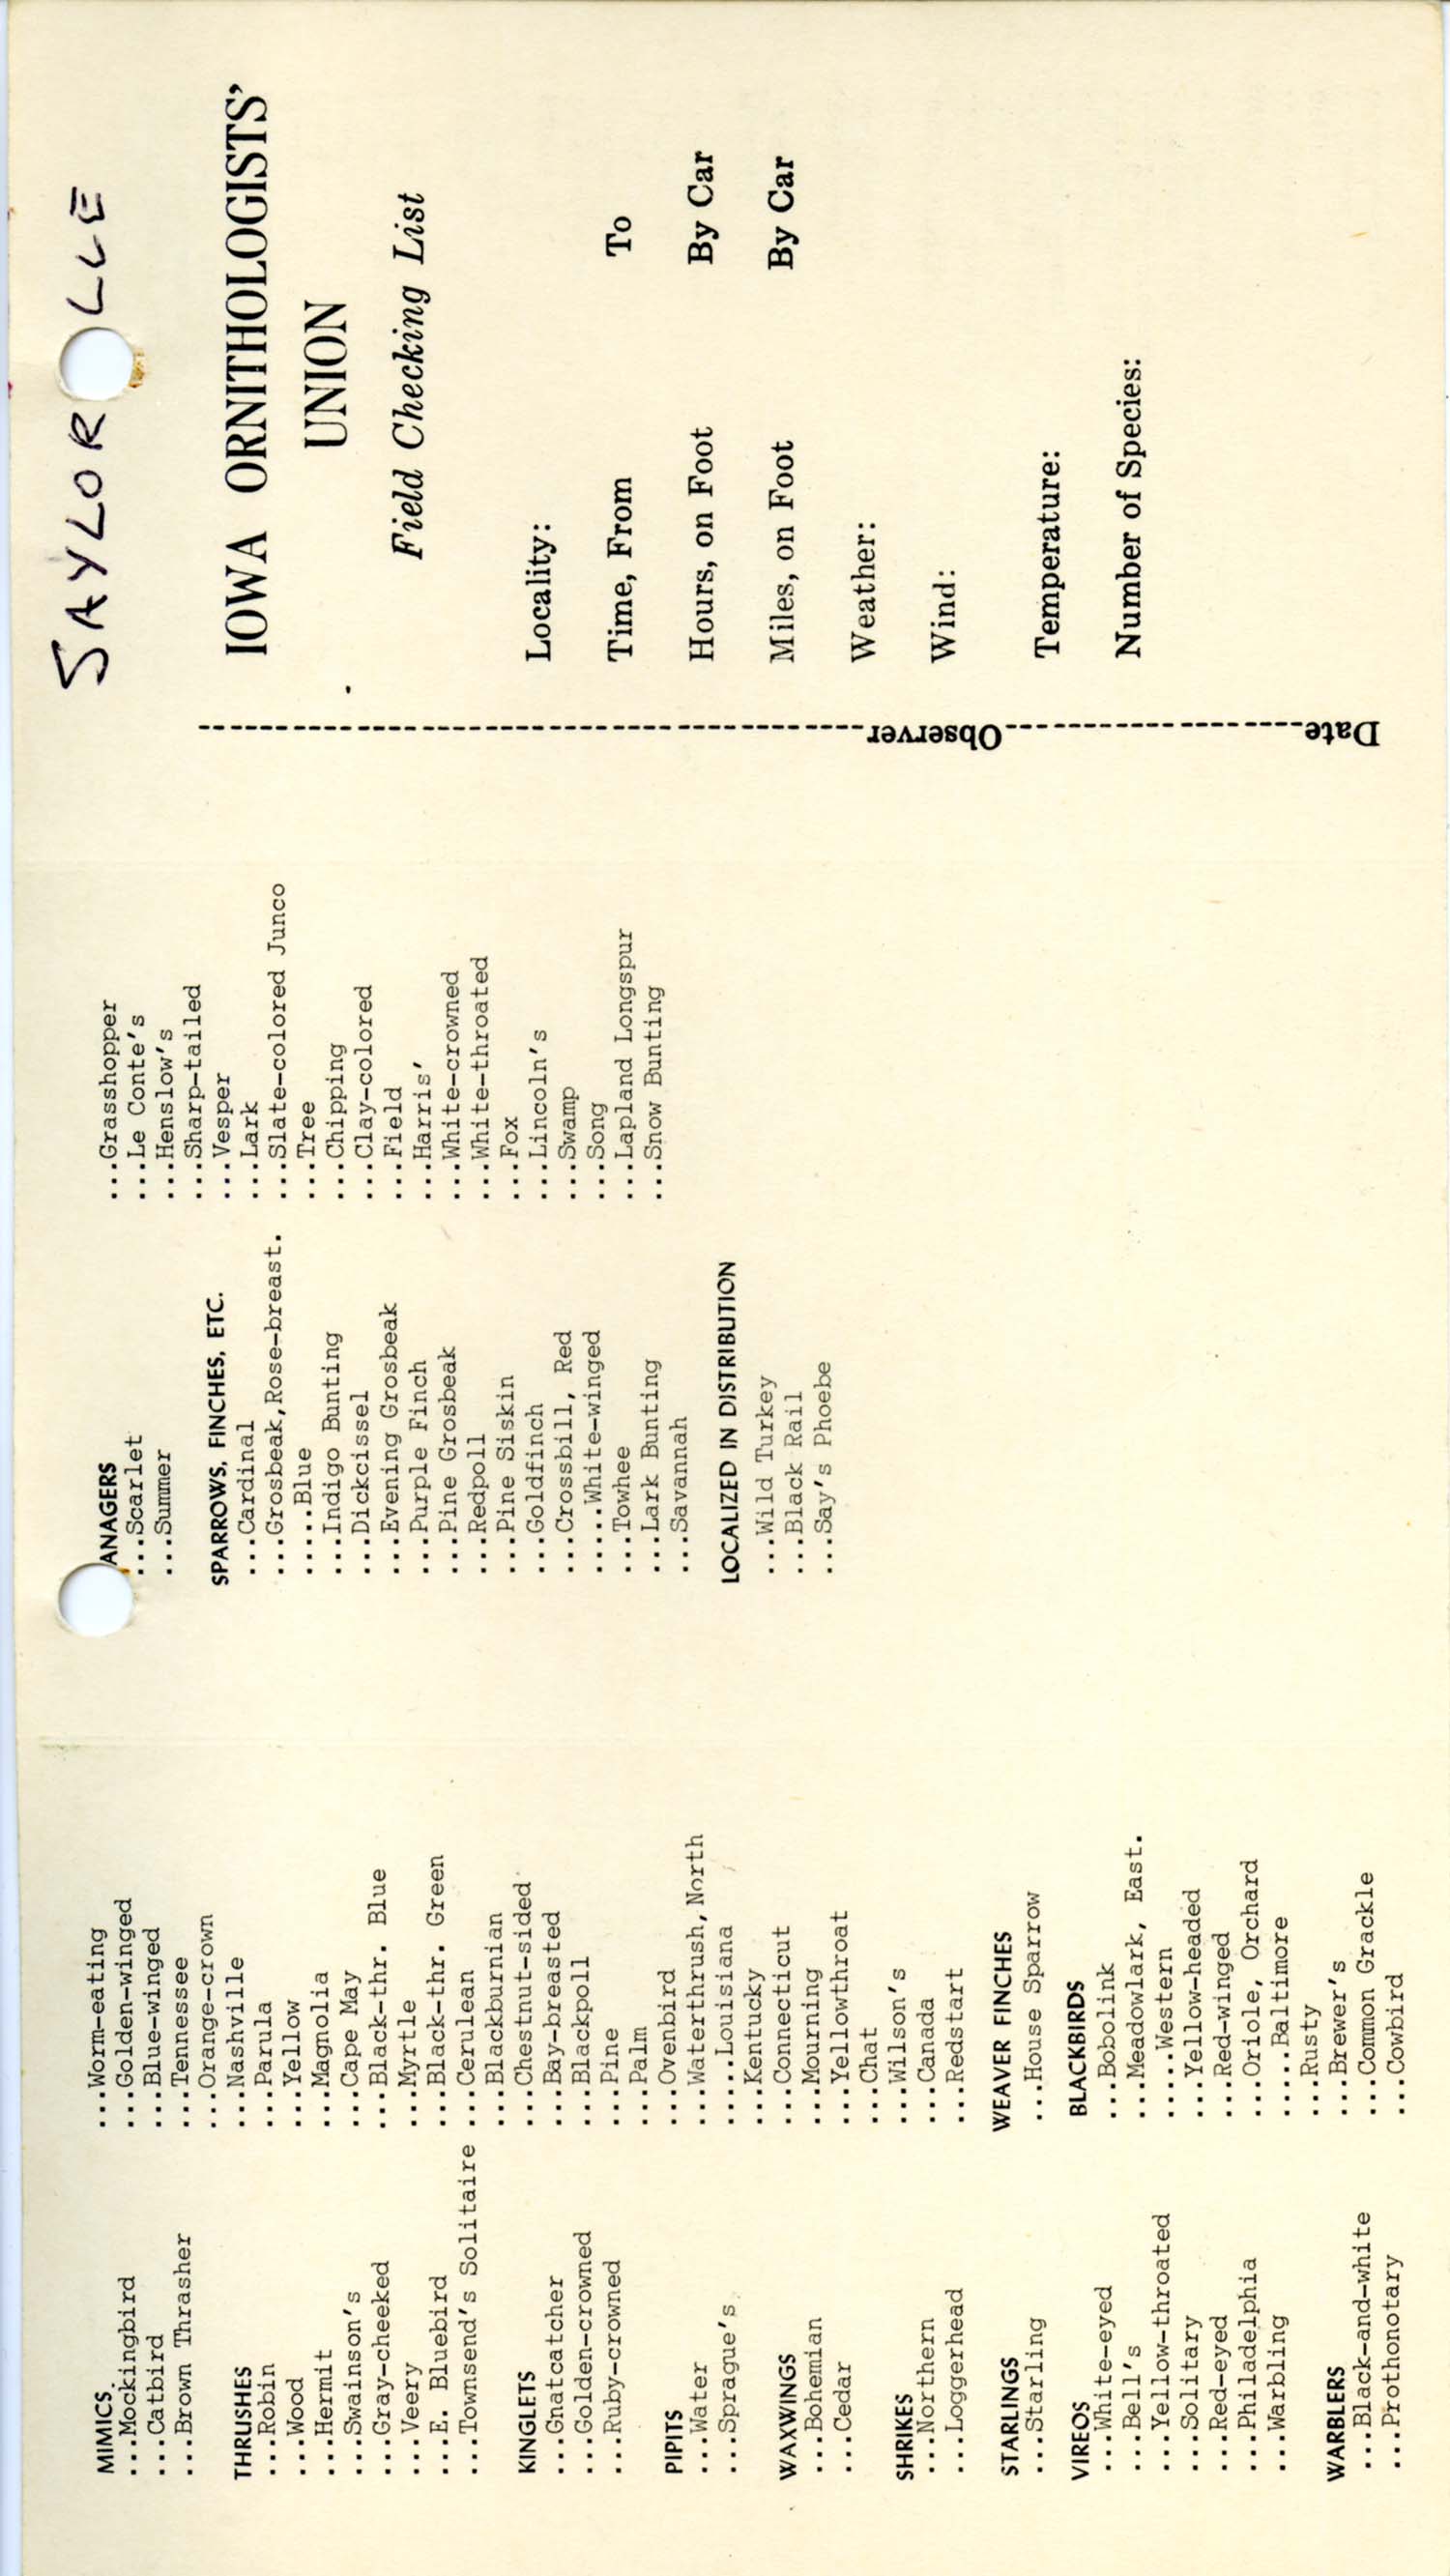 Field checking list used at Saylorville